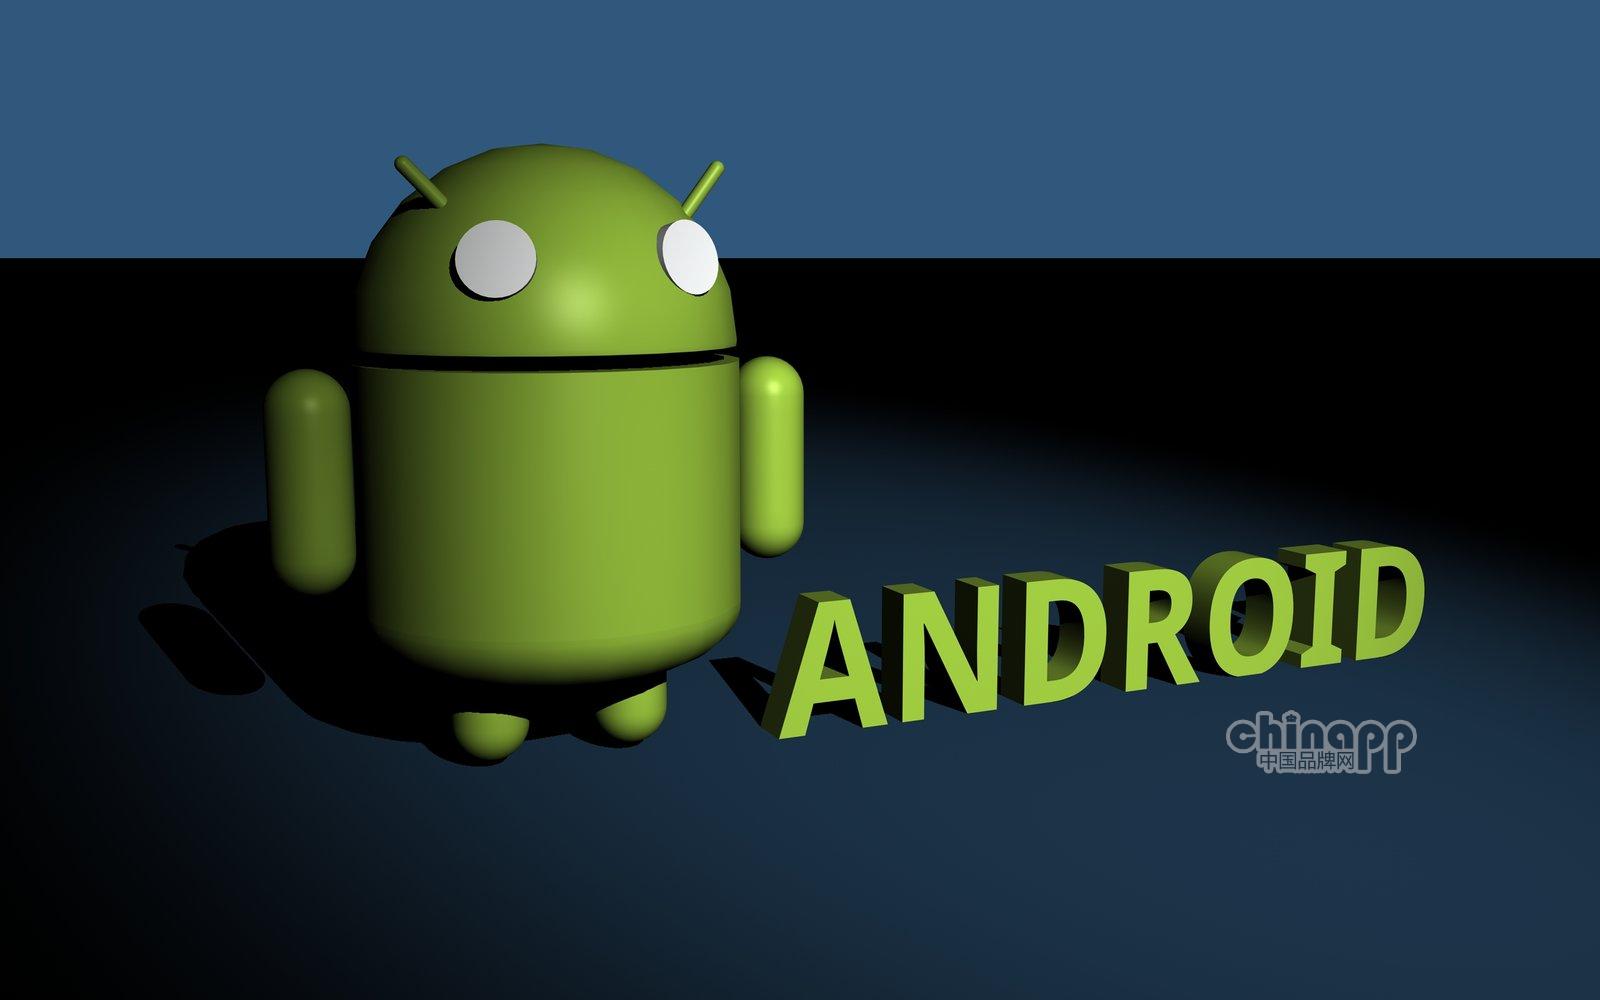 Is-Third-Party-the-Best-Party-for-Monetizing-Android-Apps.jpg